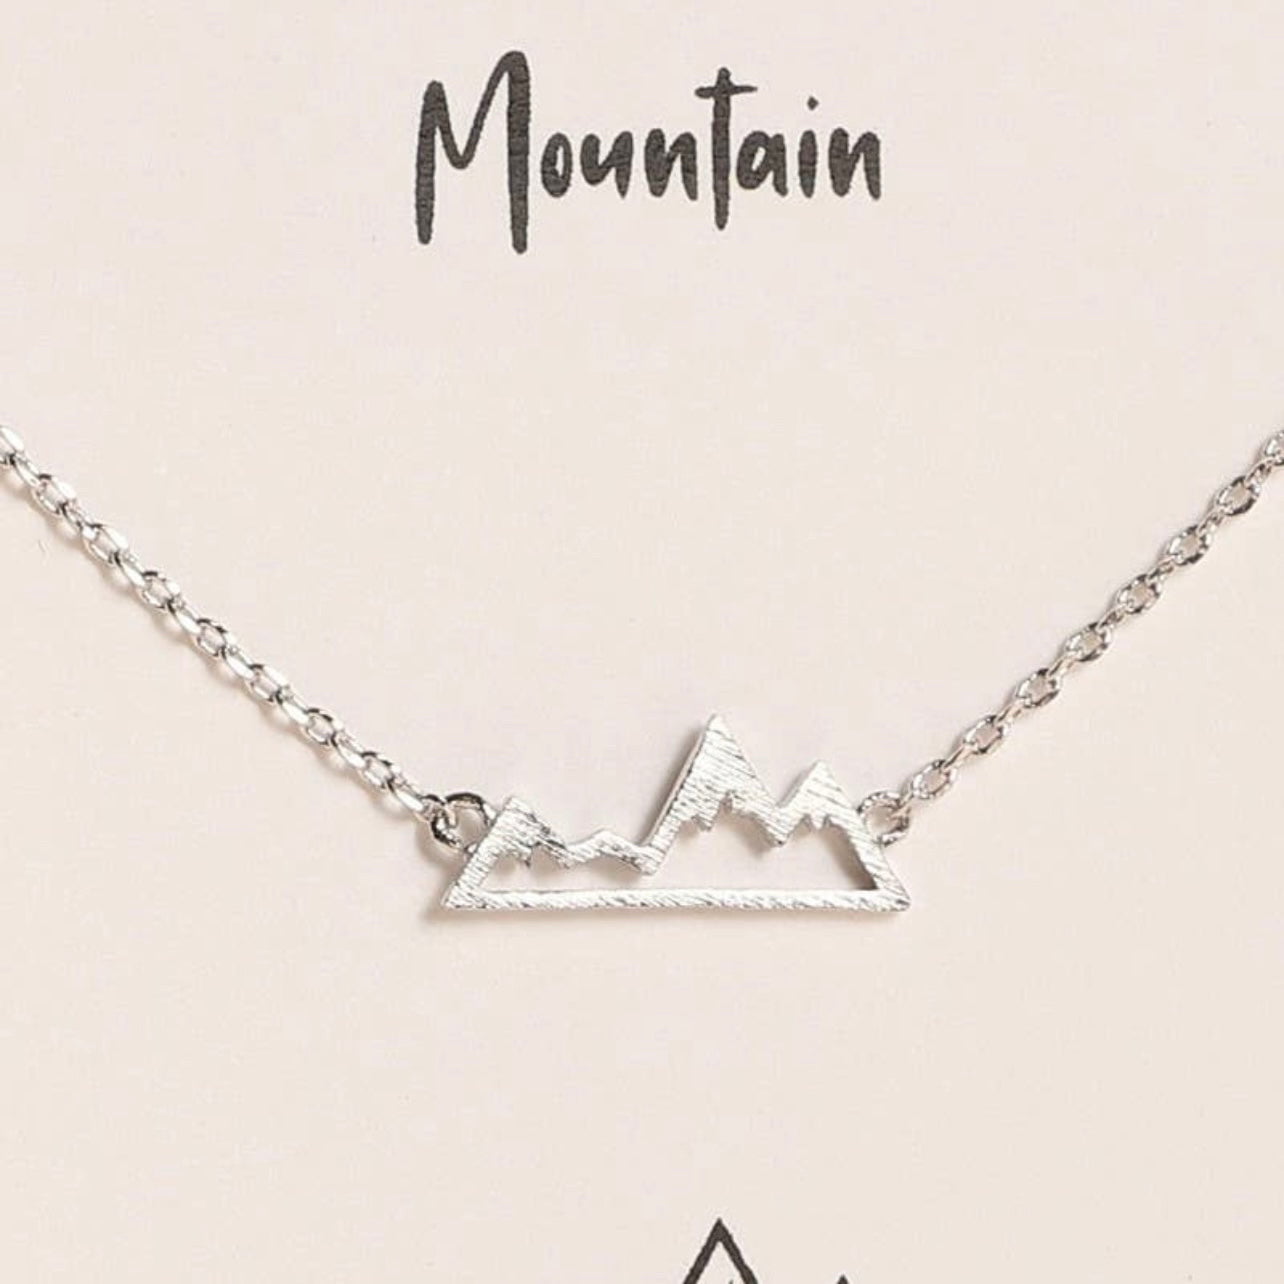 18K Gold & White Gold Dipped Mountain Charm Necklace